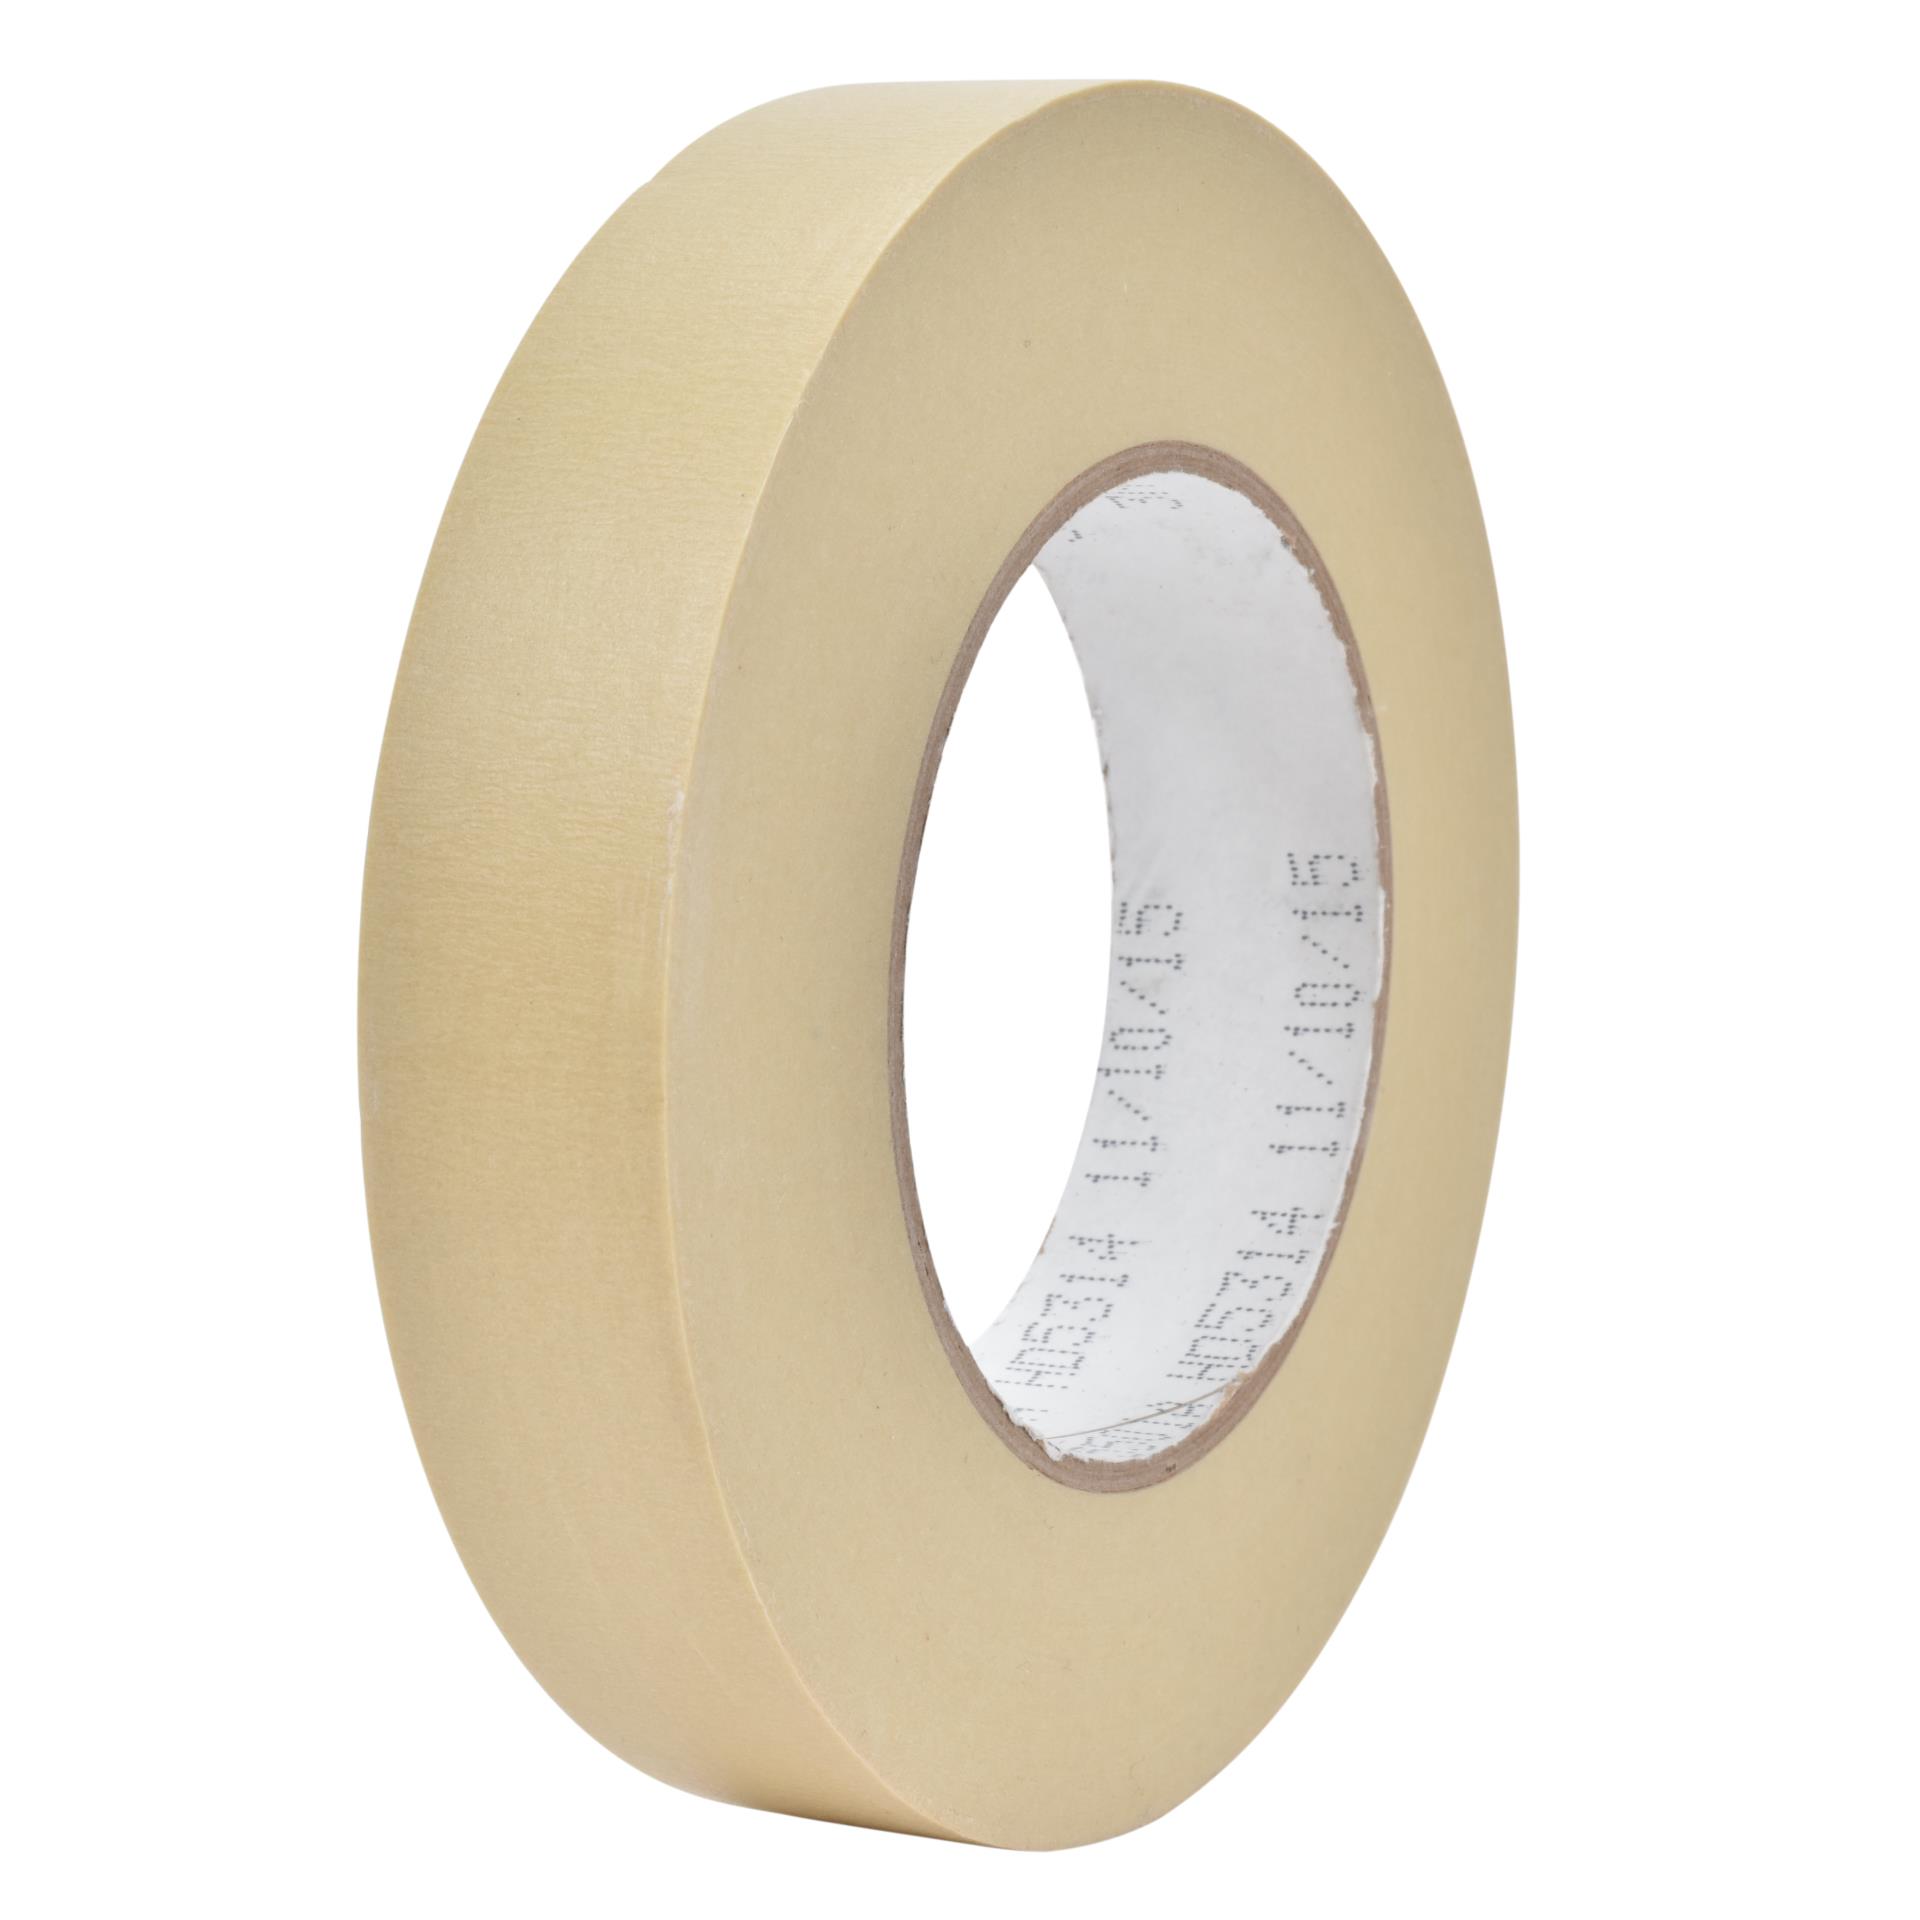 180' 5.6 Mil Masking Tapes 24 Rolls Blue Painters Tape 2" x 60 Yards 